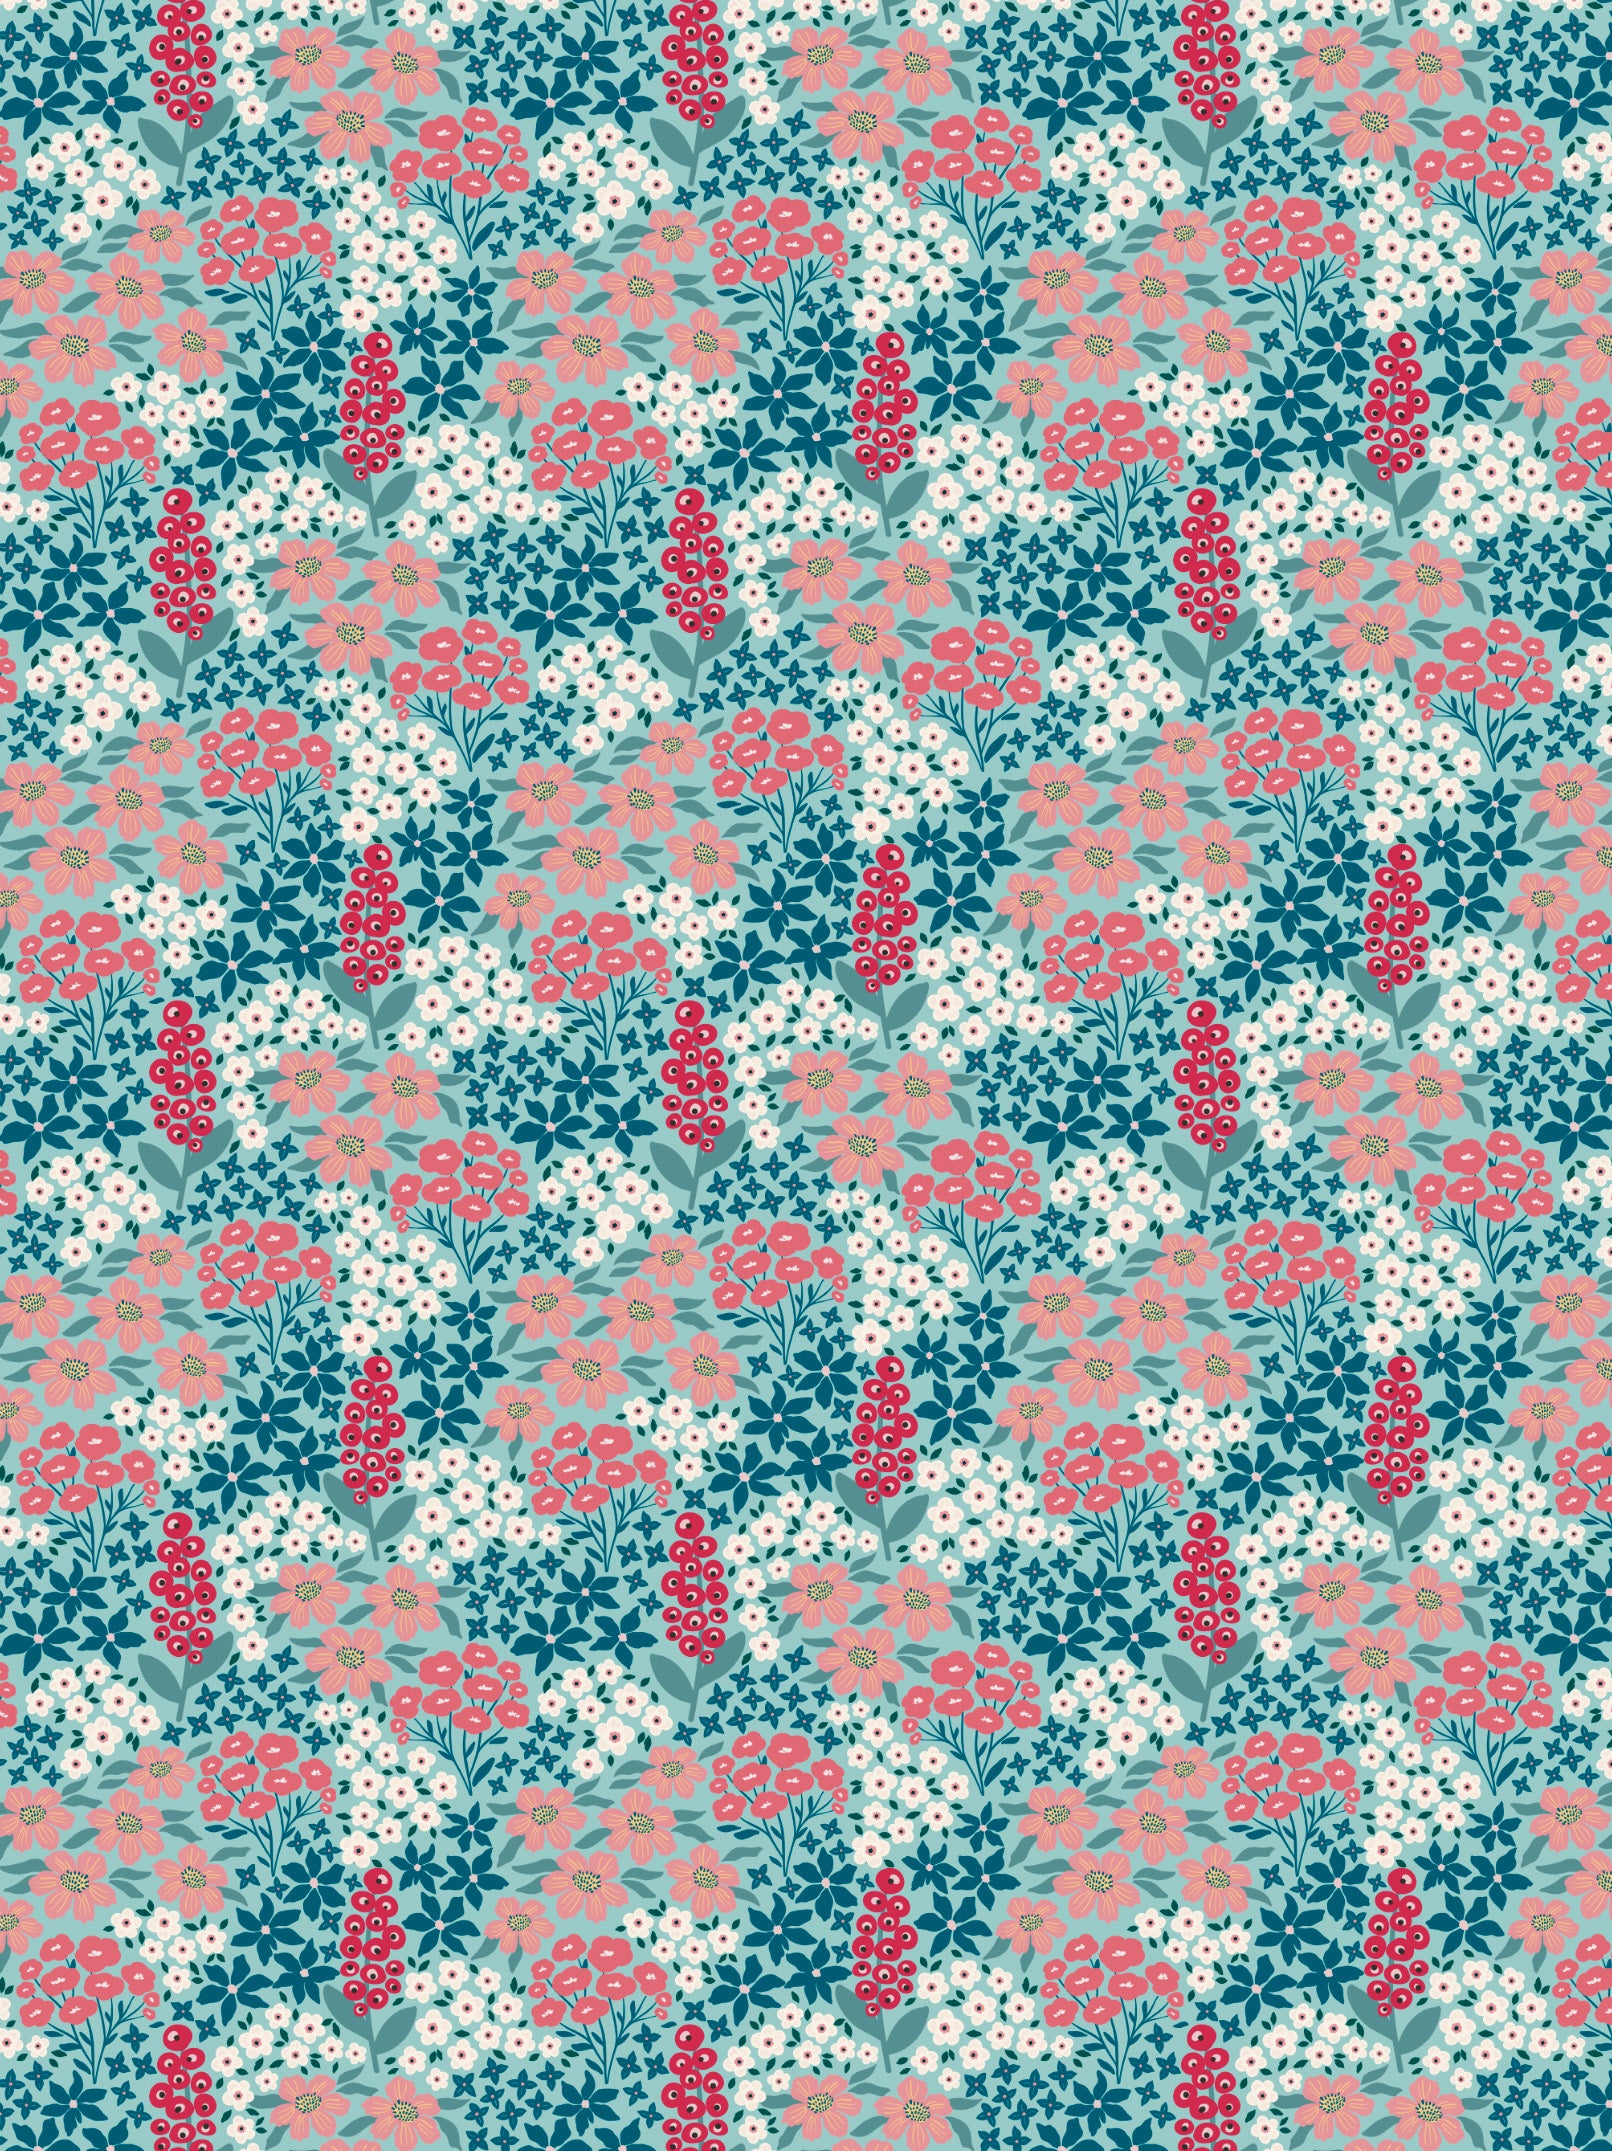 Image Transfers | Salmon, Pink, and Blue Floral Doodle